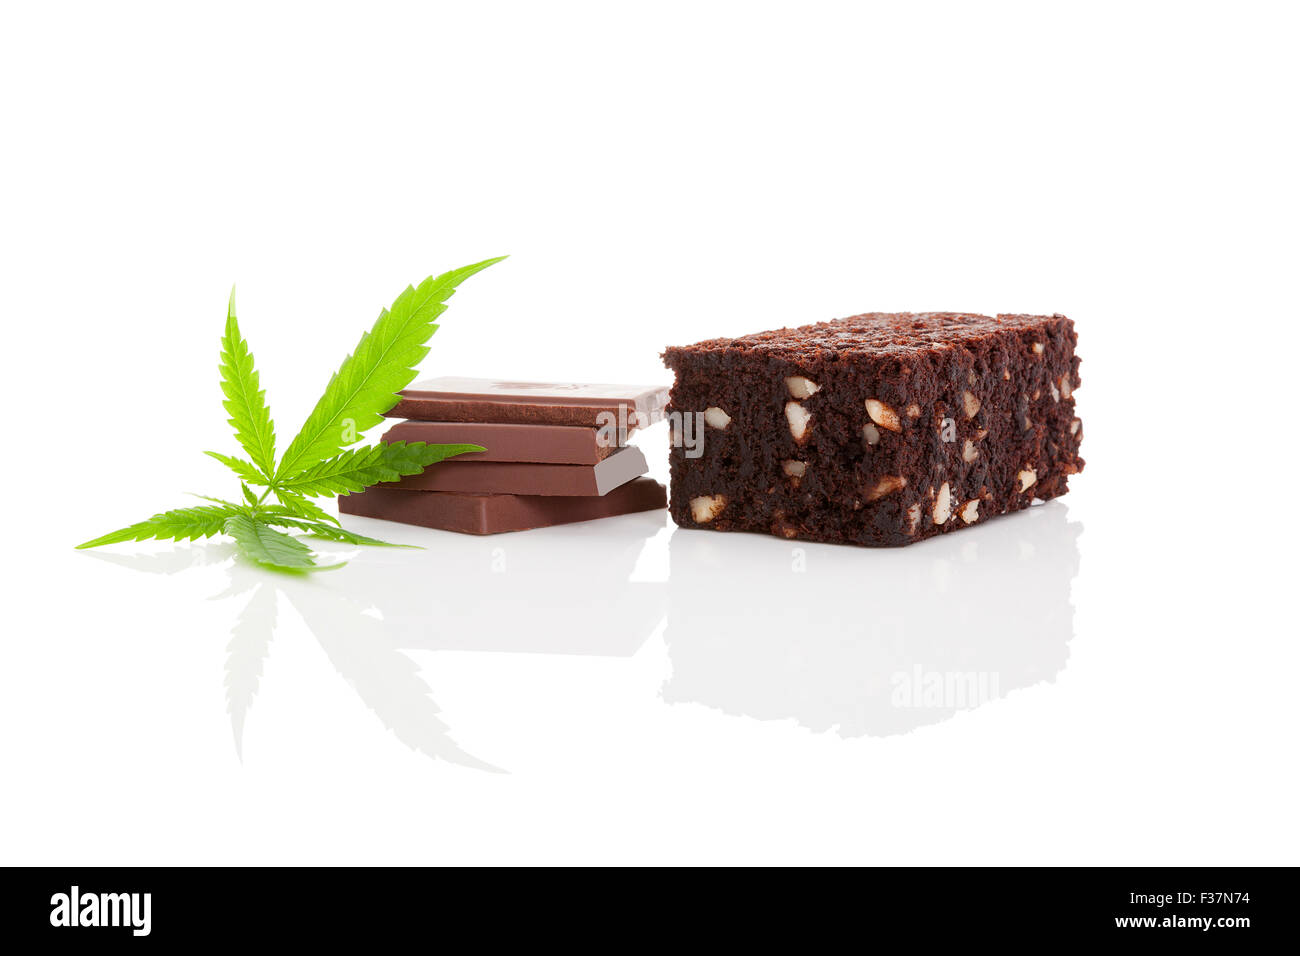 Cannabis chocolate and cannabis brownie with ganja leaf isolated on white background. Stock Photo